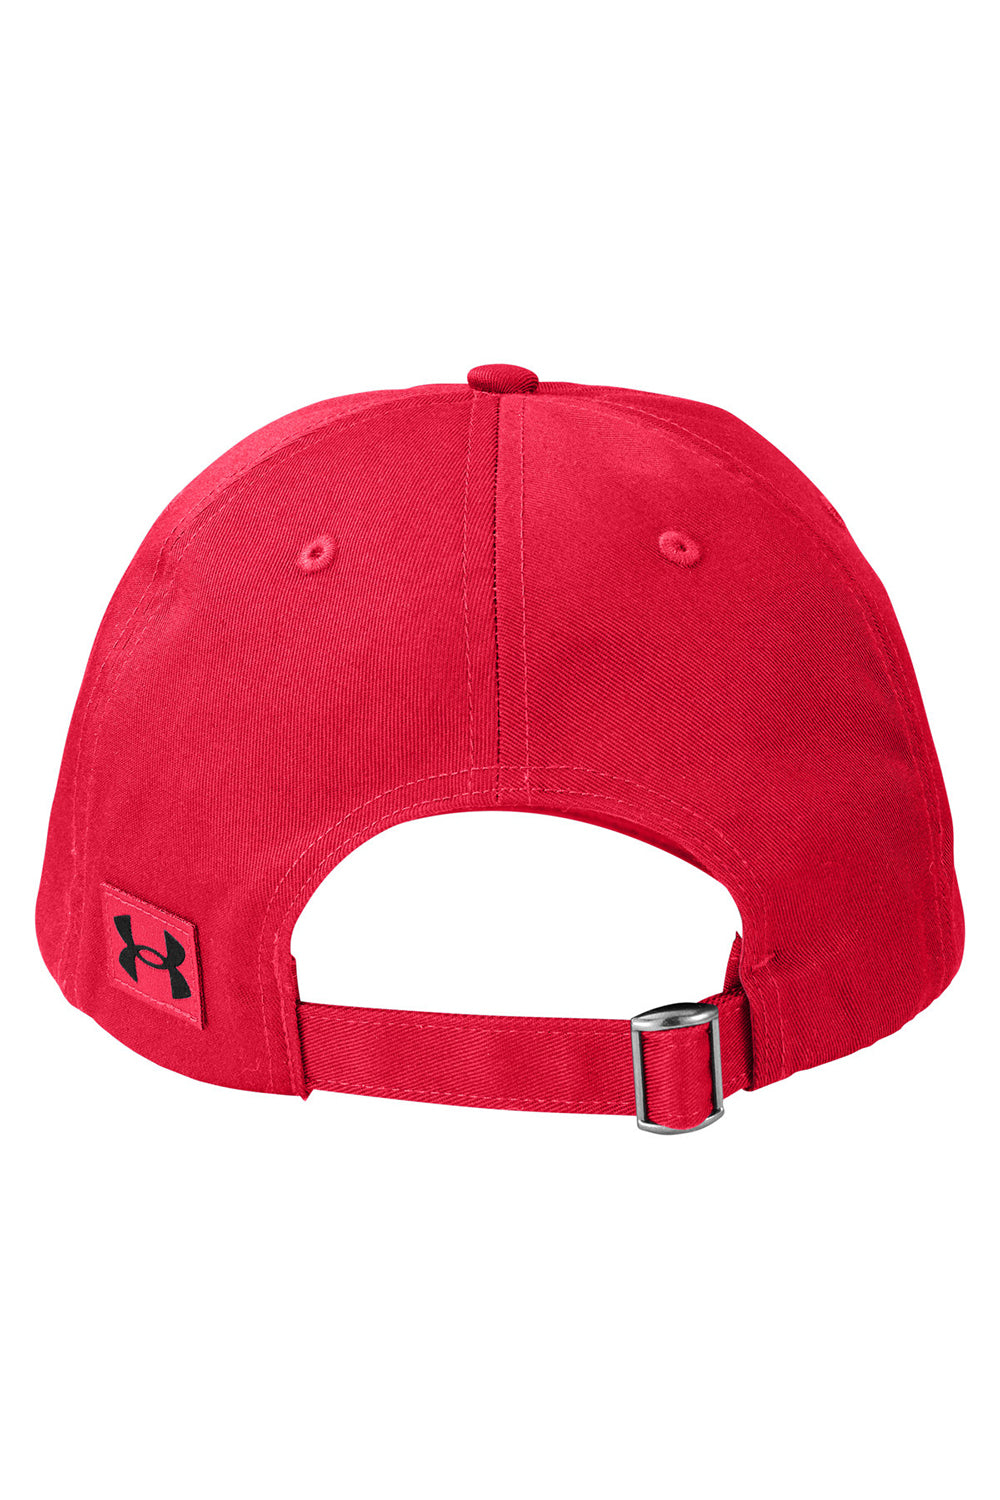 Under Armour 1369785  Moisture Wicking Team Chino Adjustable Hat Red Flat Back